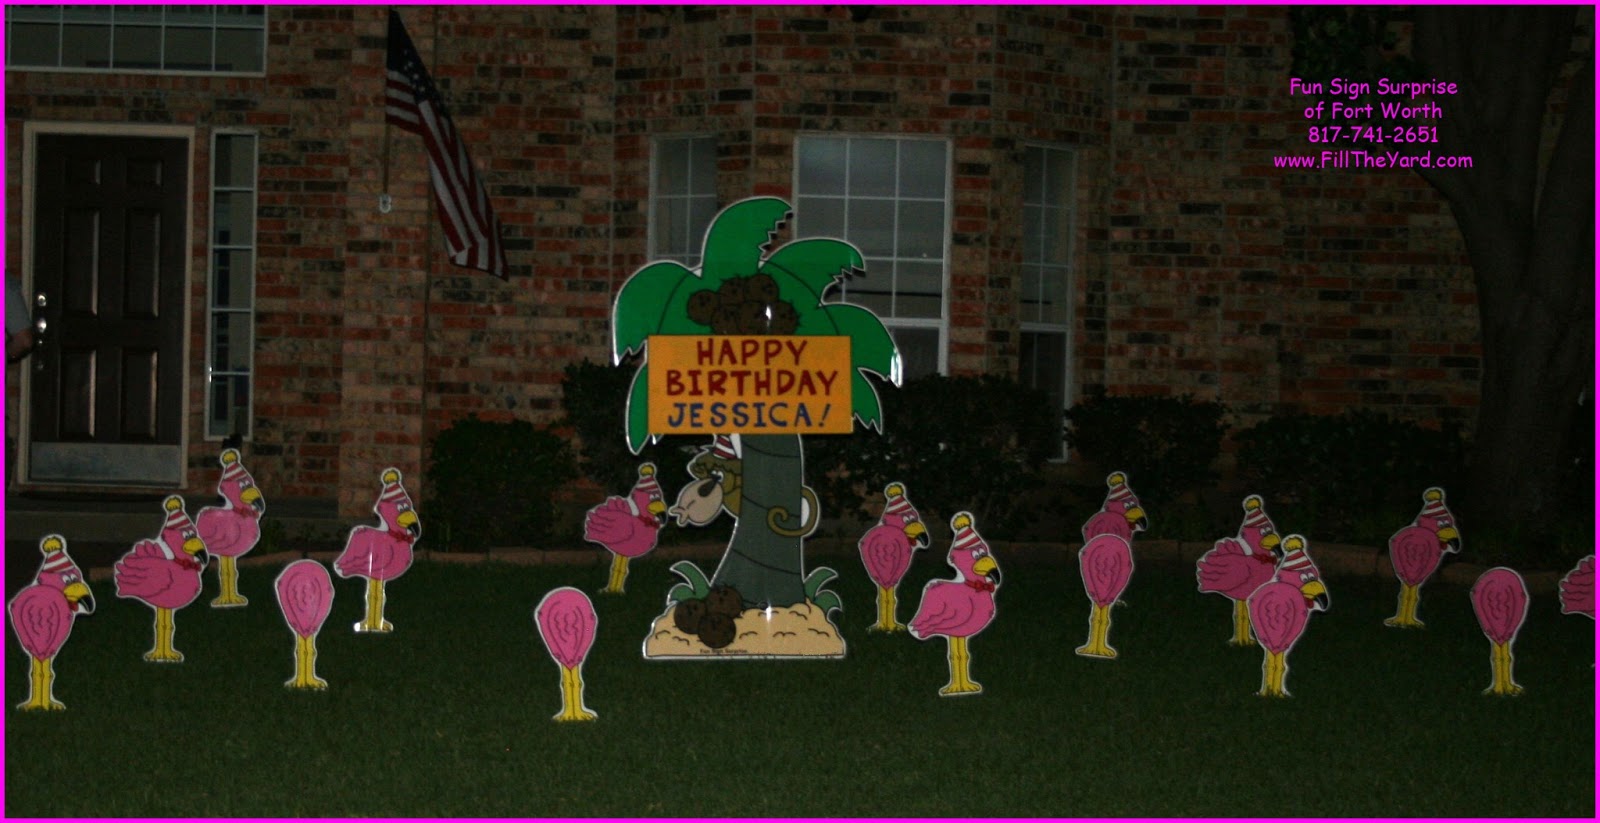 Fun Sign Surprise Fort Worth Lawn Greetings Happy Birthday